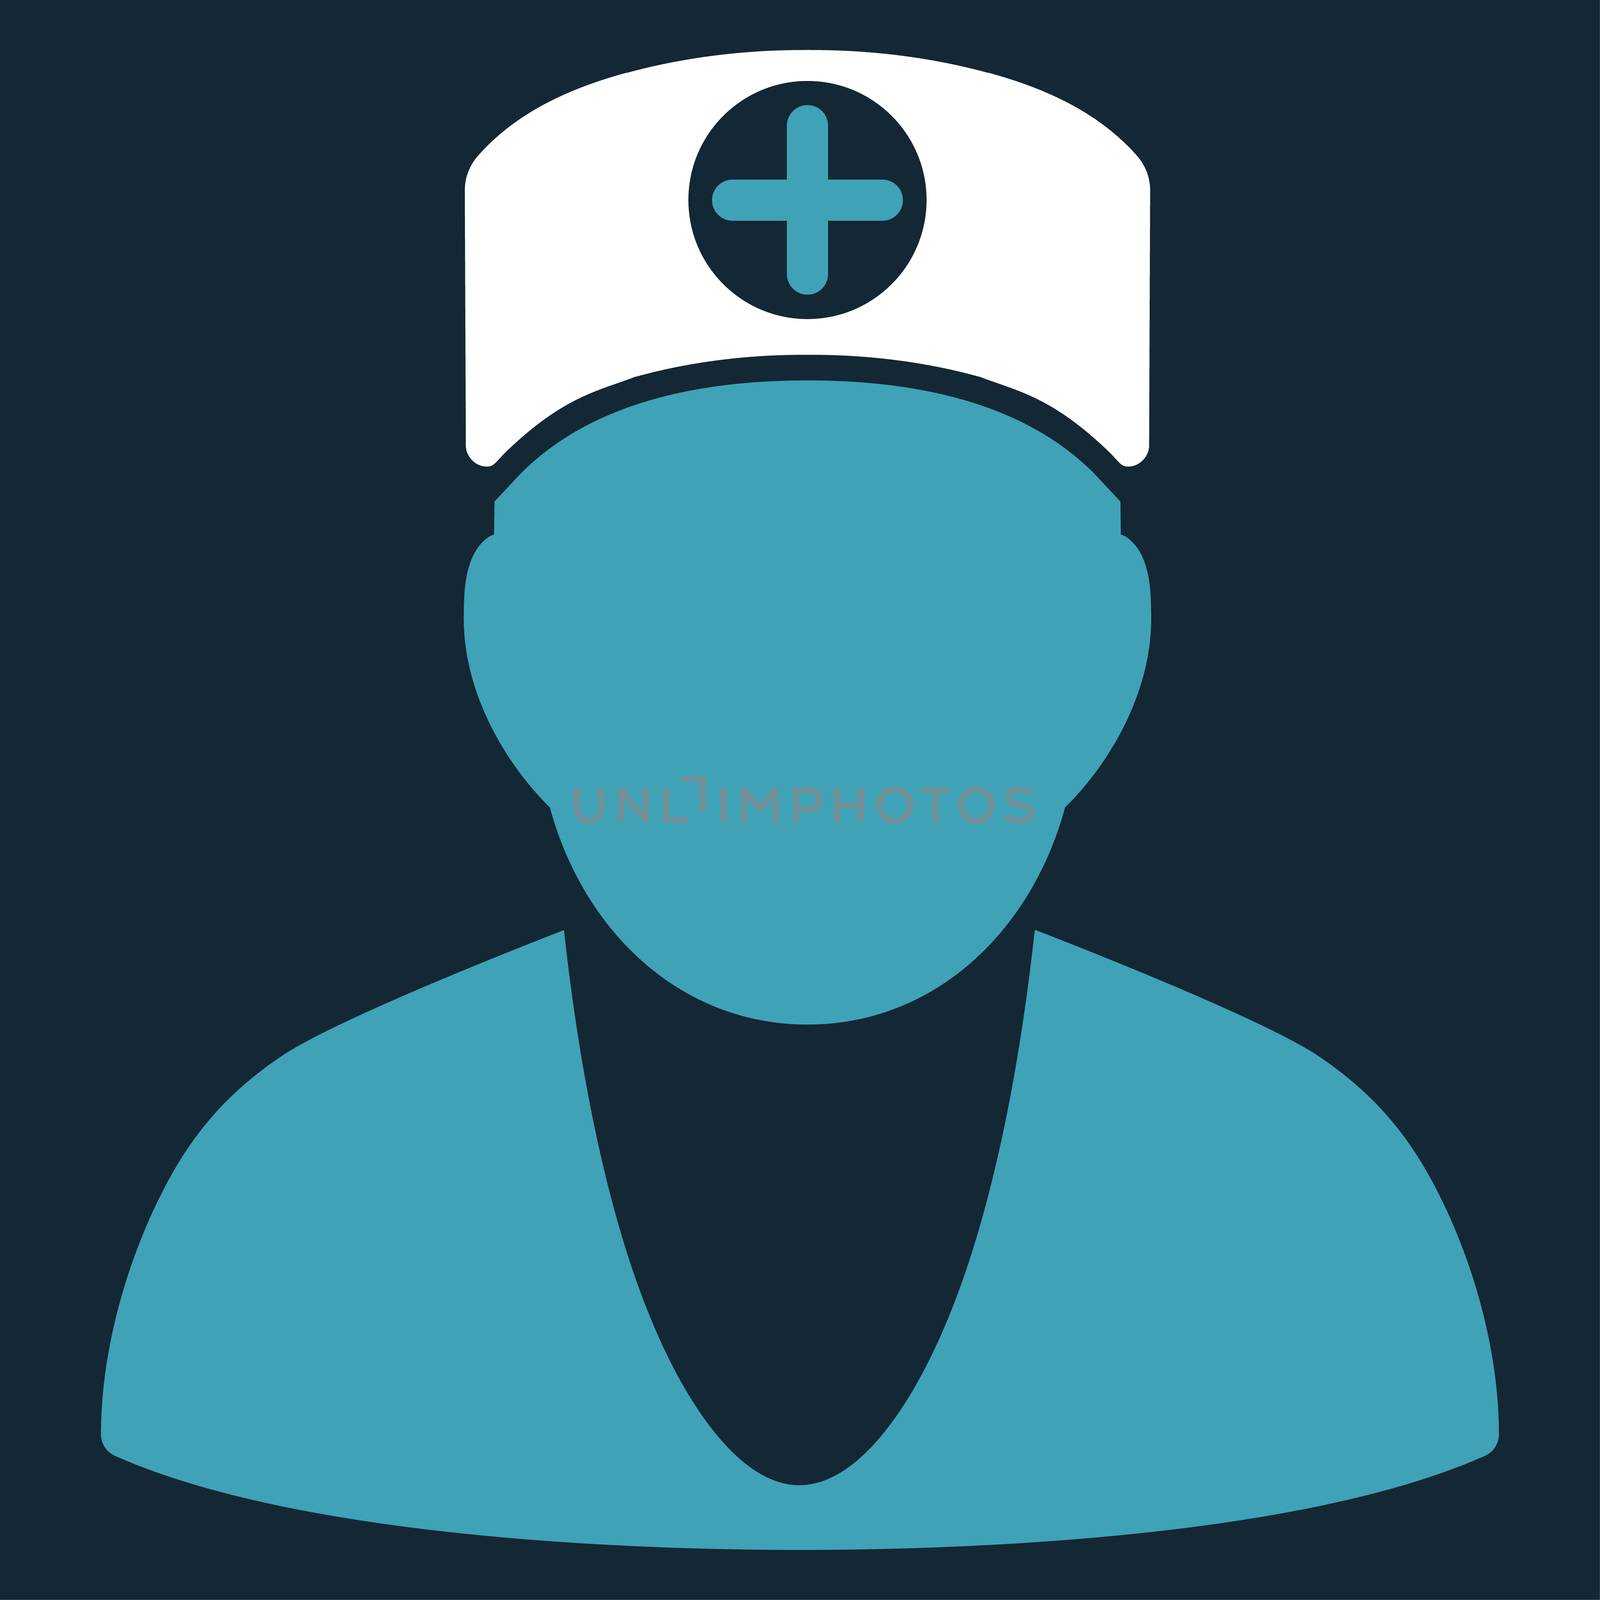 Doctor raster icon. Style is bicolor flat symbol, blue and white colors, rounded angles, dark blue background.